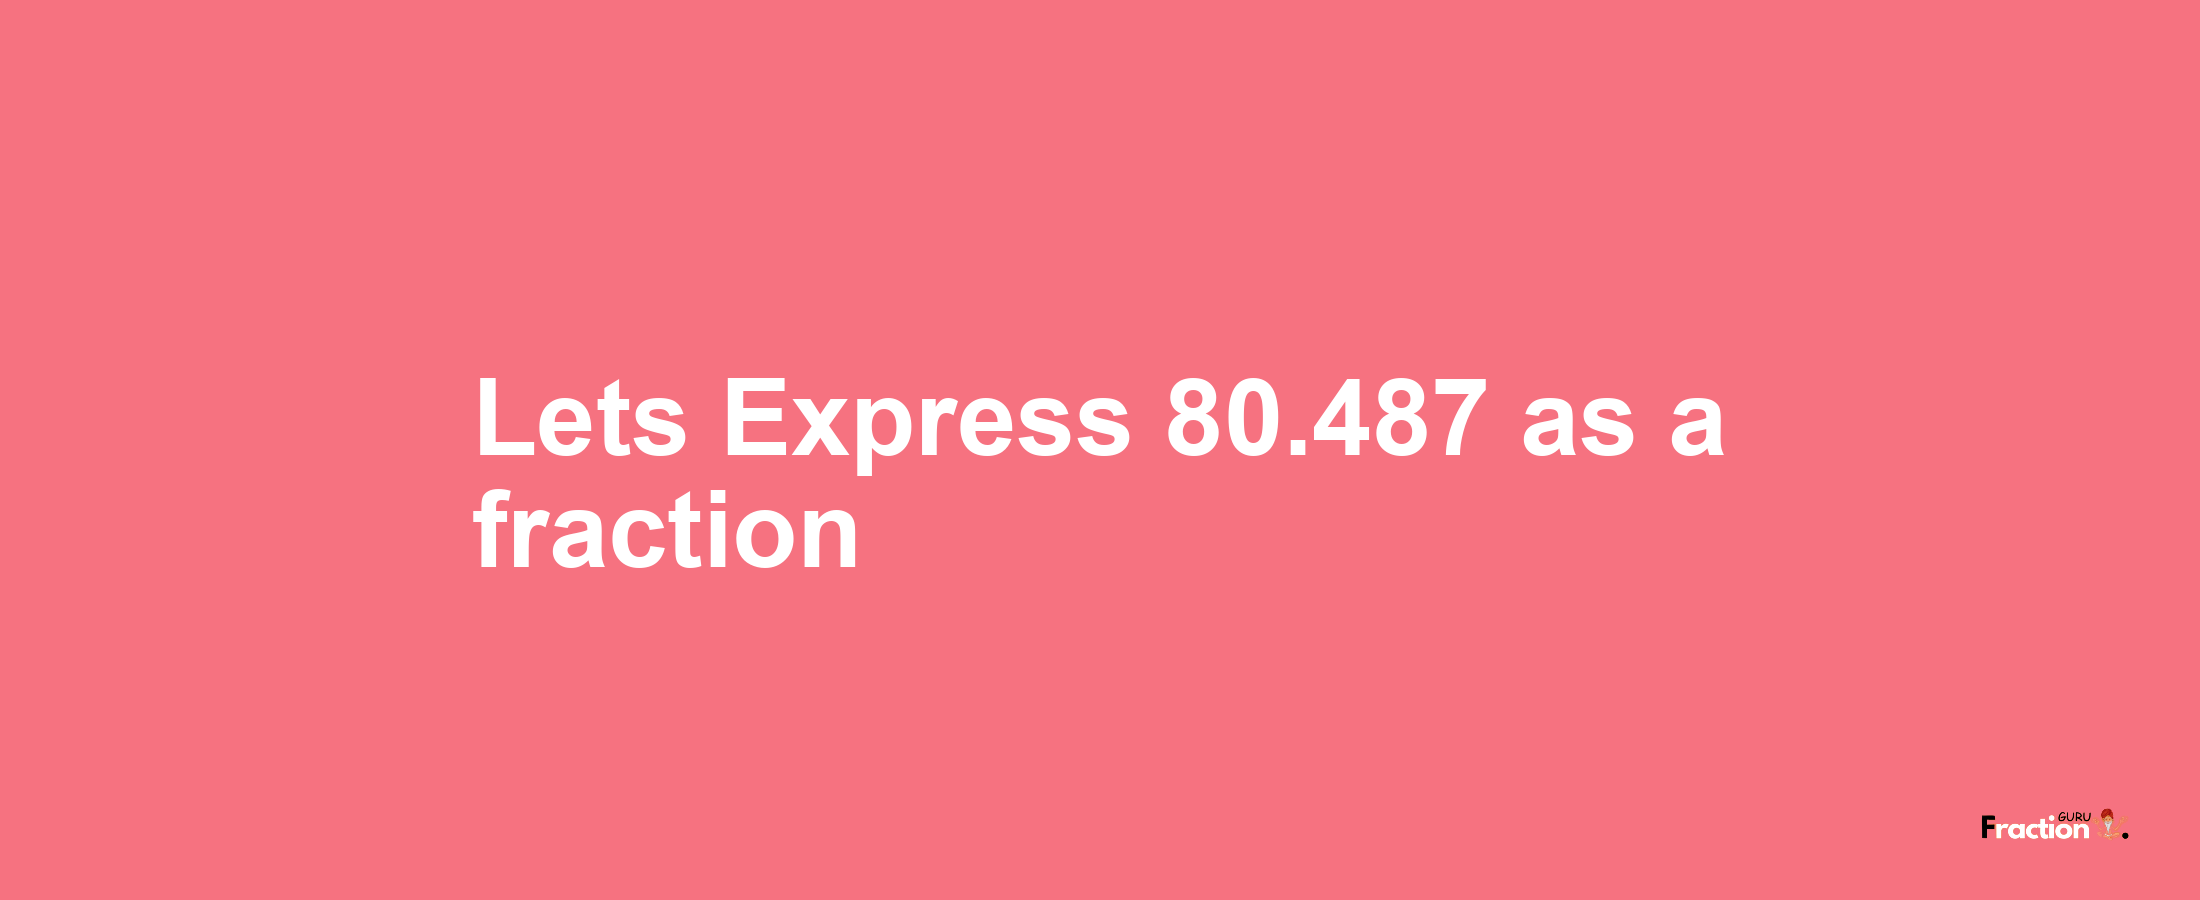 Lets Express 80.487 as afraction